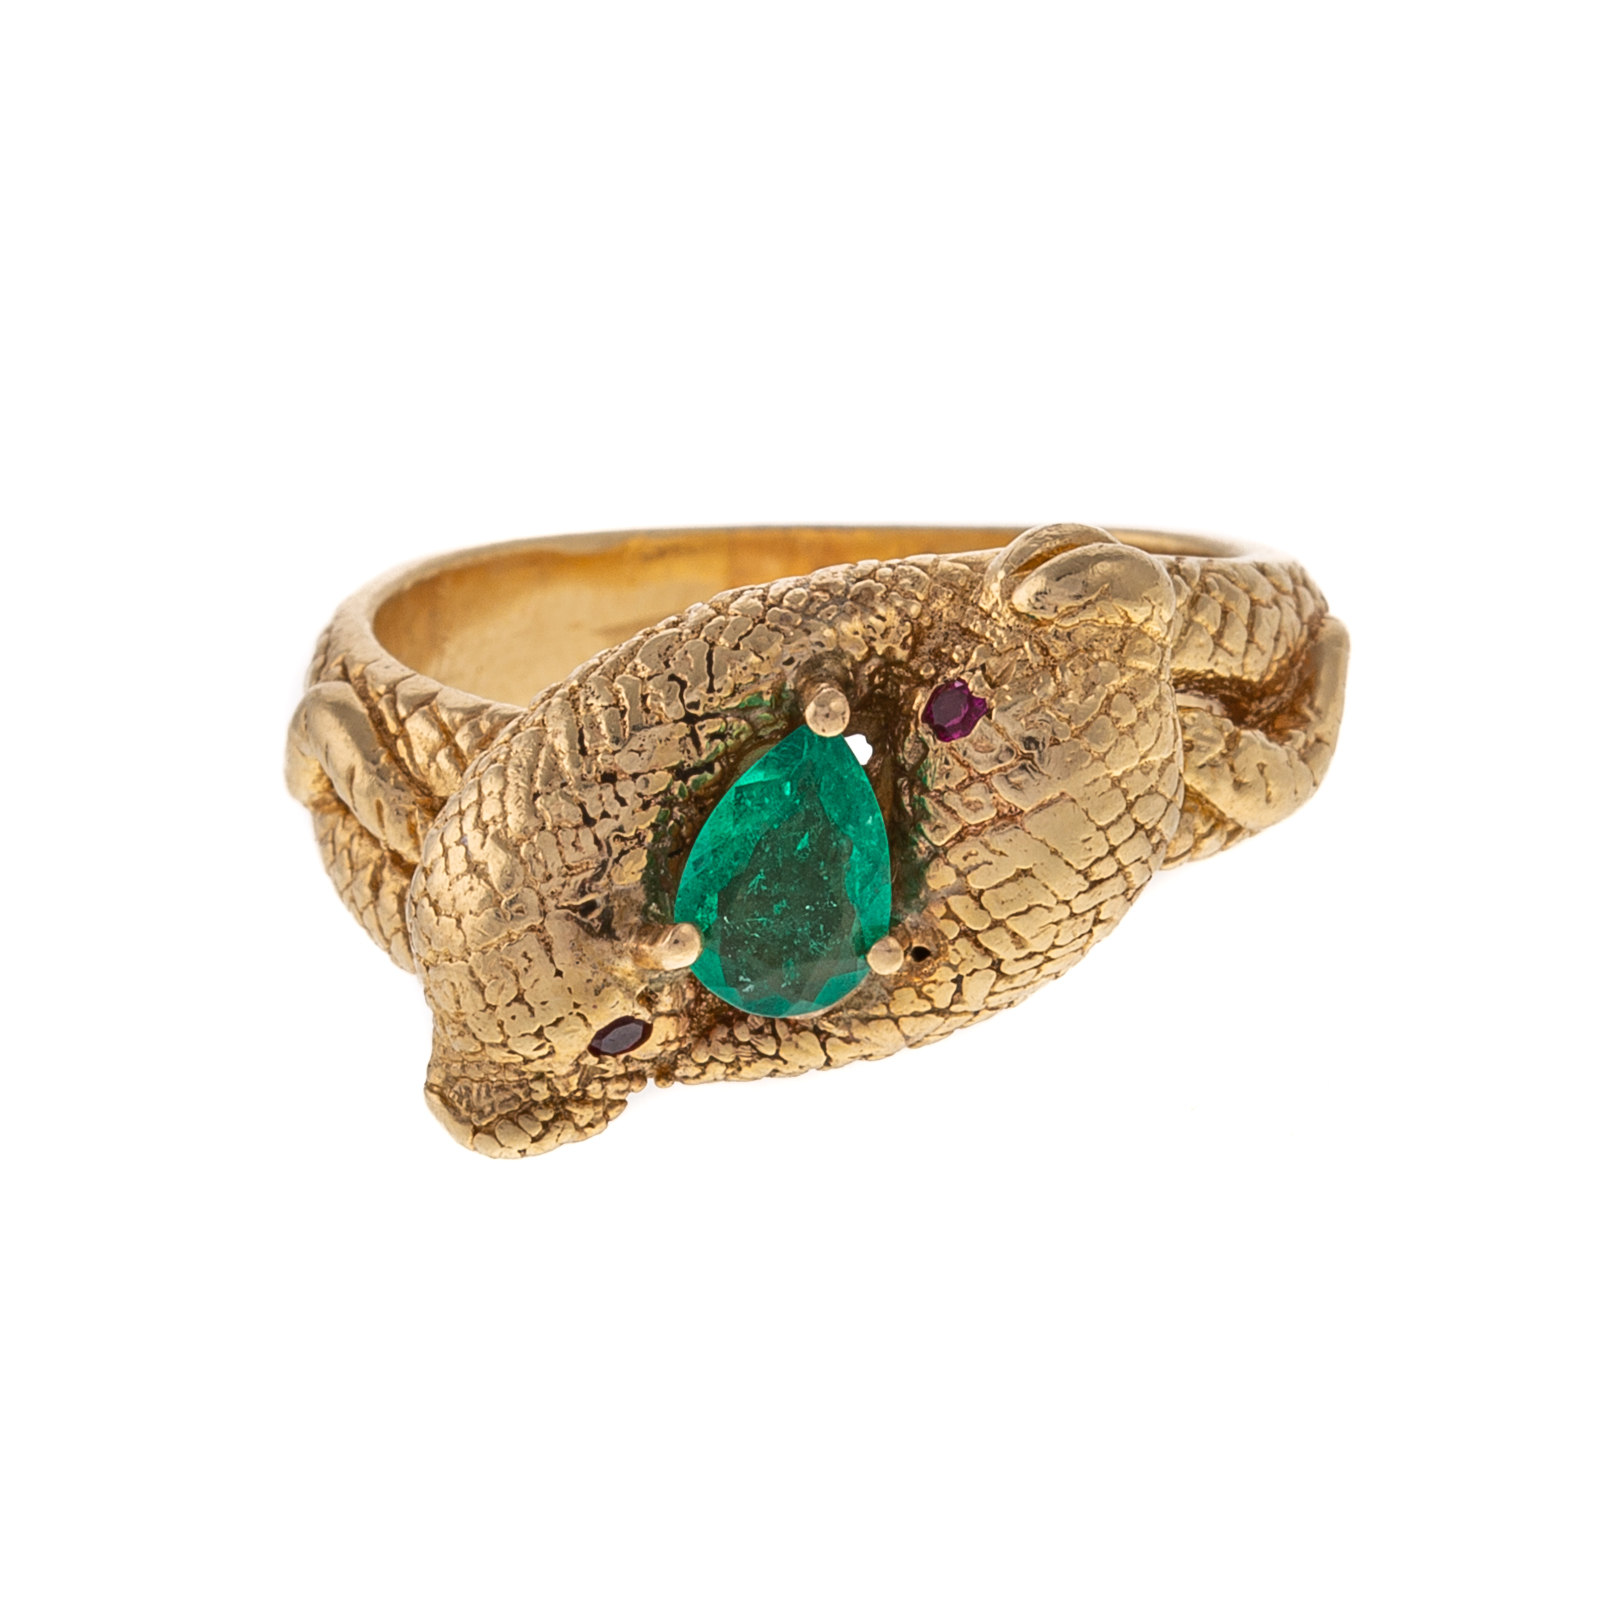 A 14K DOUBLE SNAKE RING WITH EMERALD